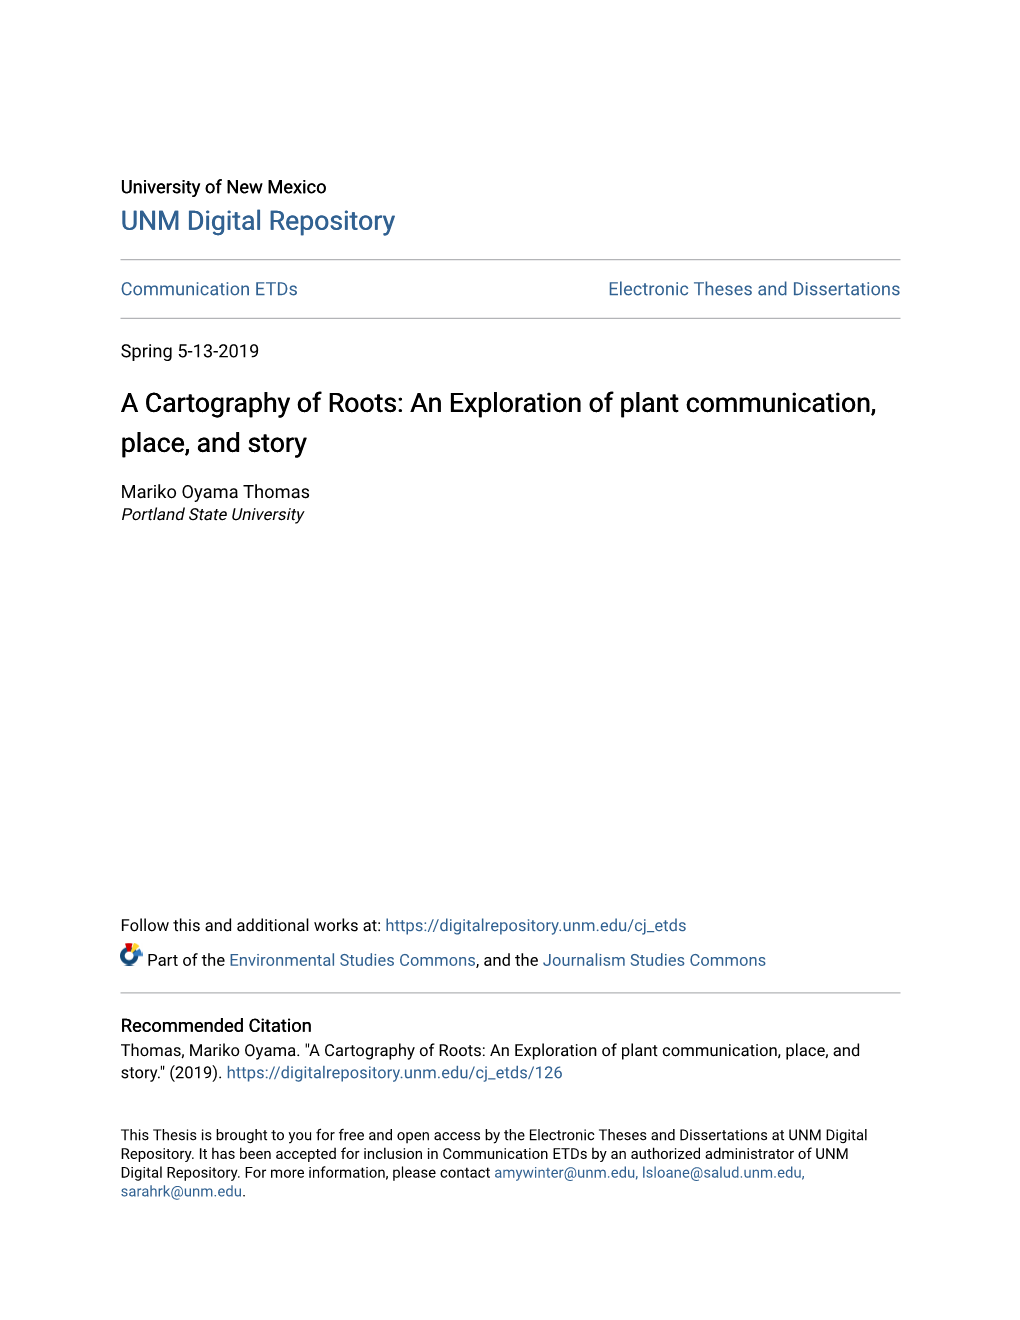 A Cartography of Roots: an Exploration of Plant Communication, Place, and Story